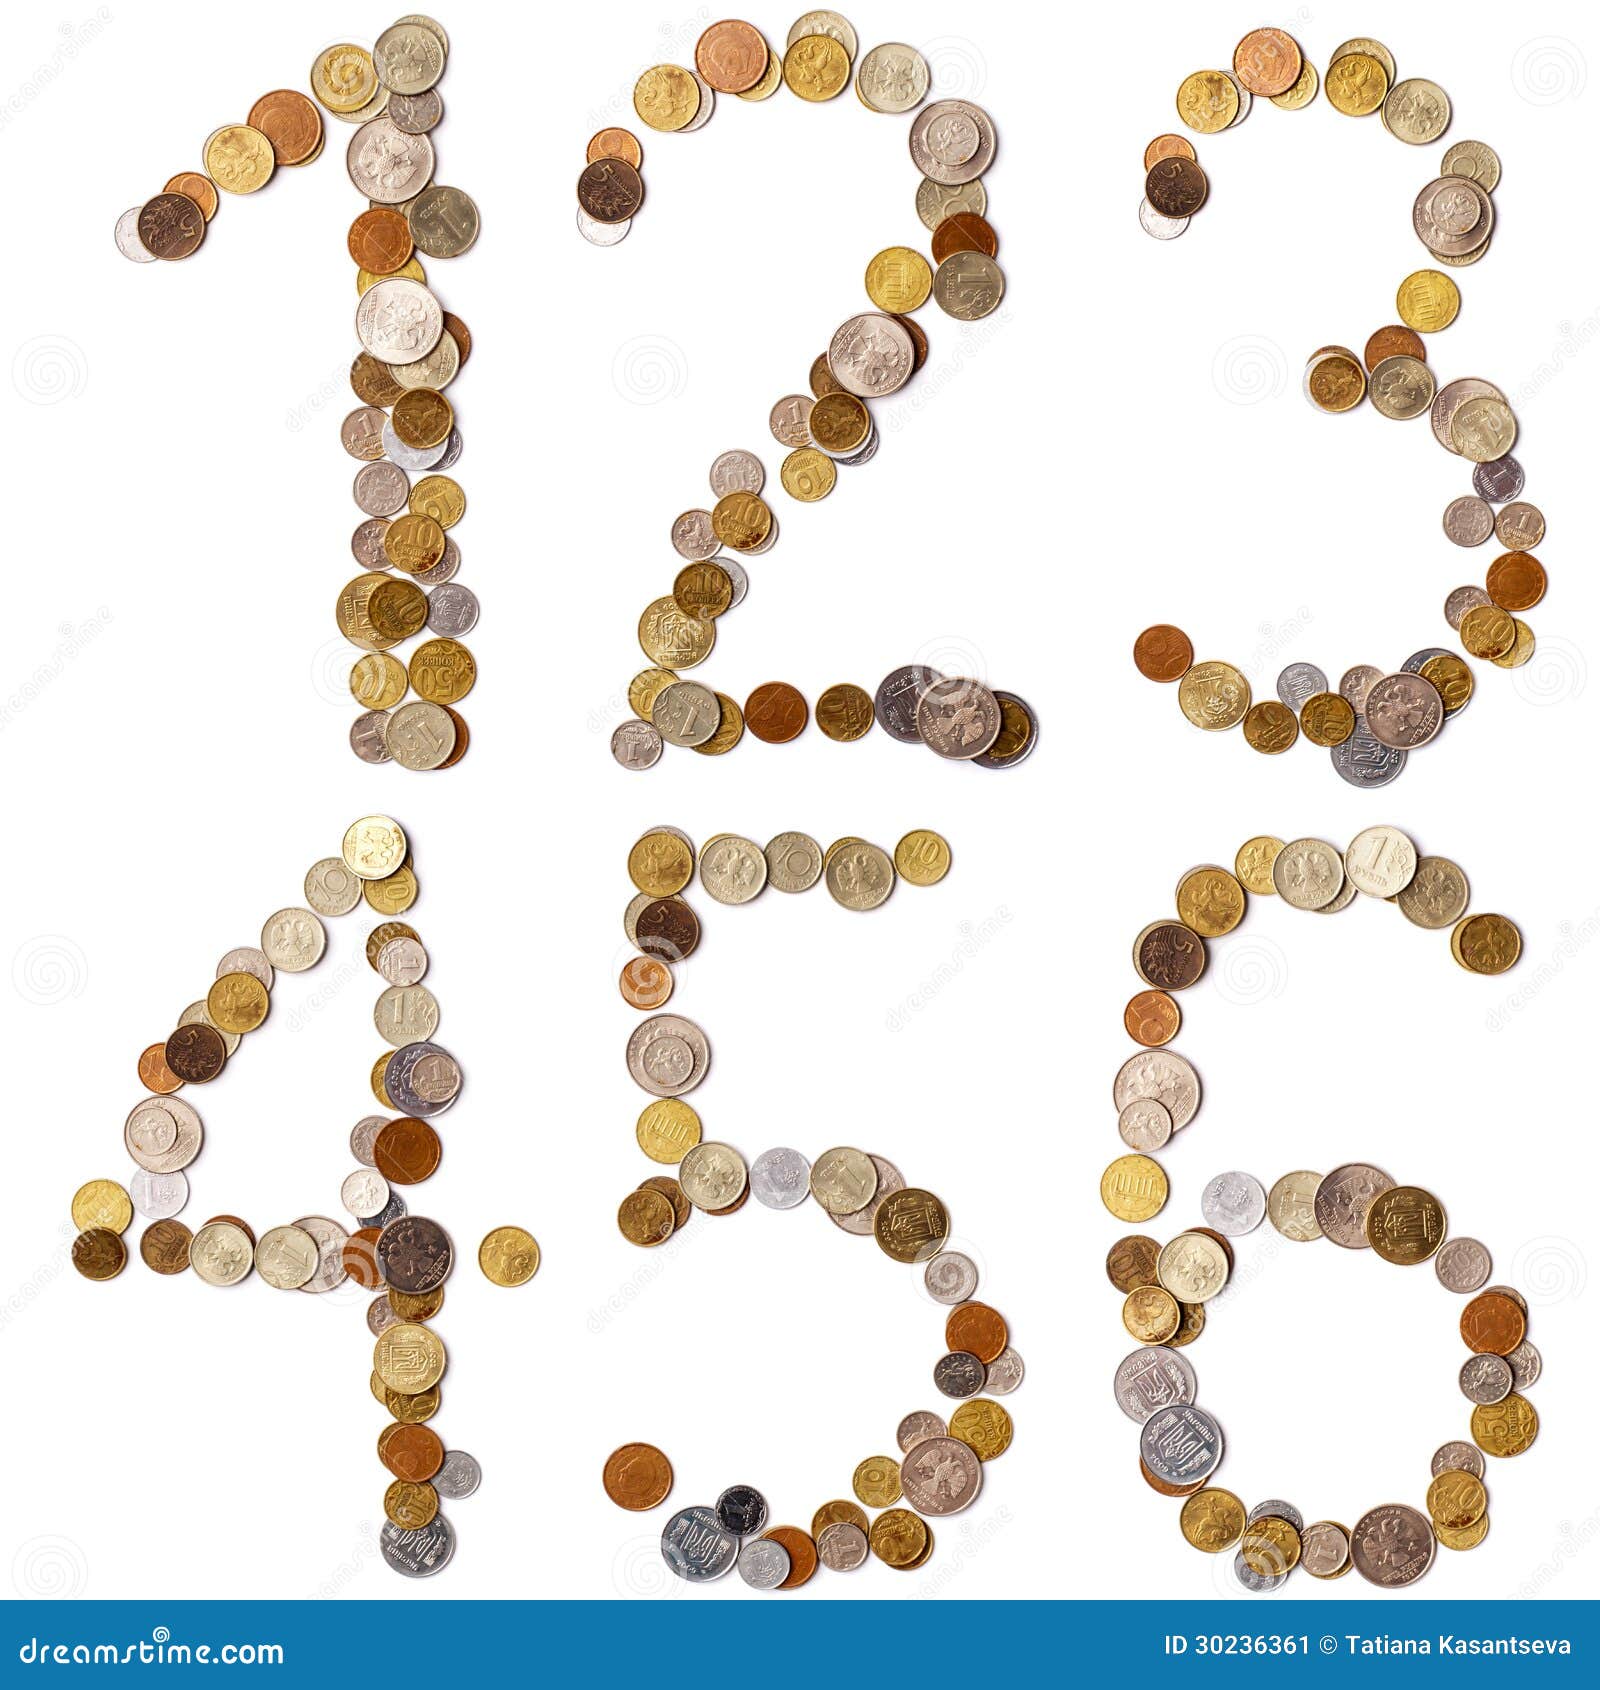 1 2 3 4 5 6 Alphabet Letters From The Coins Stock Image Image Of Europe Banking